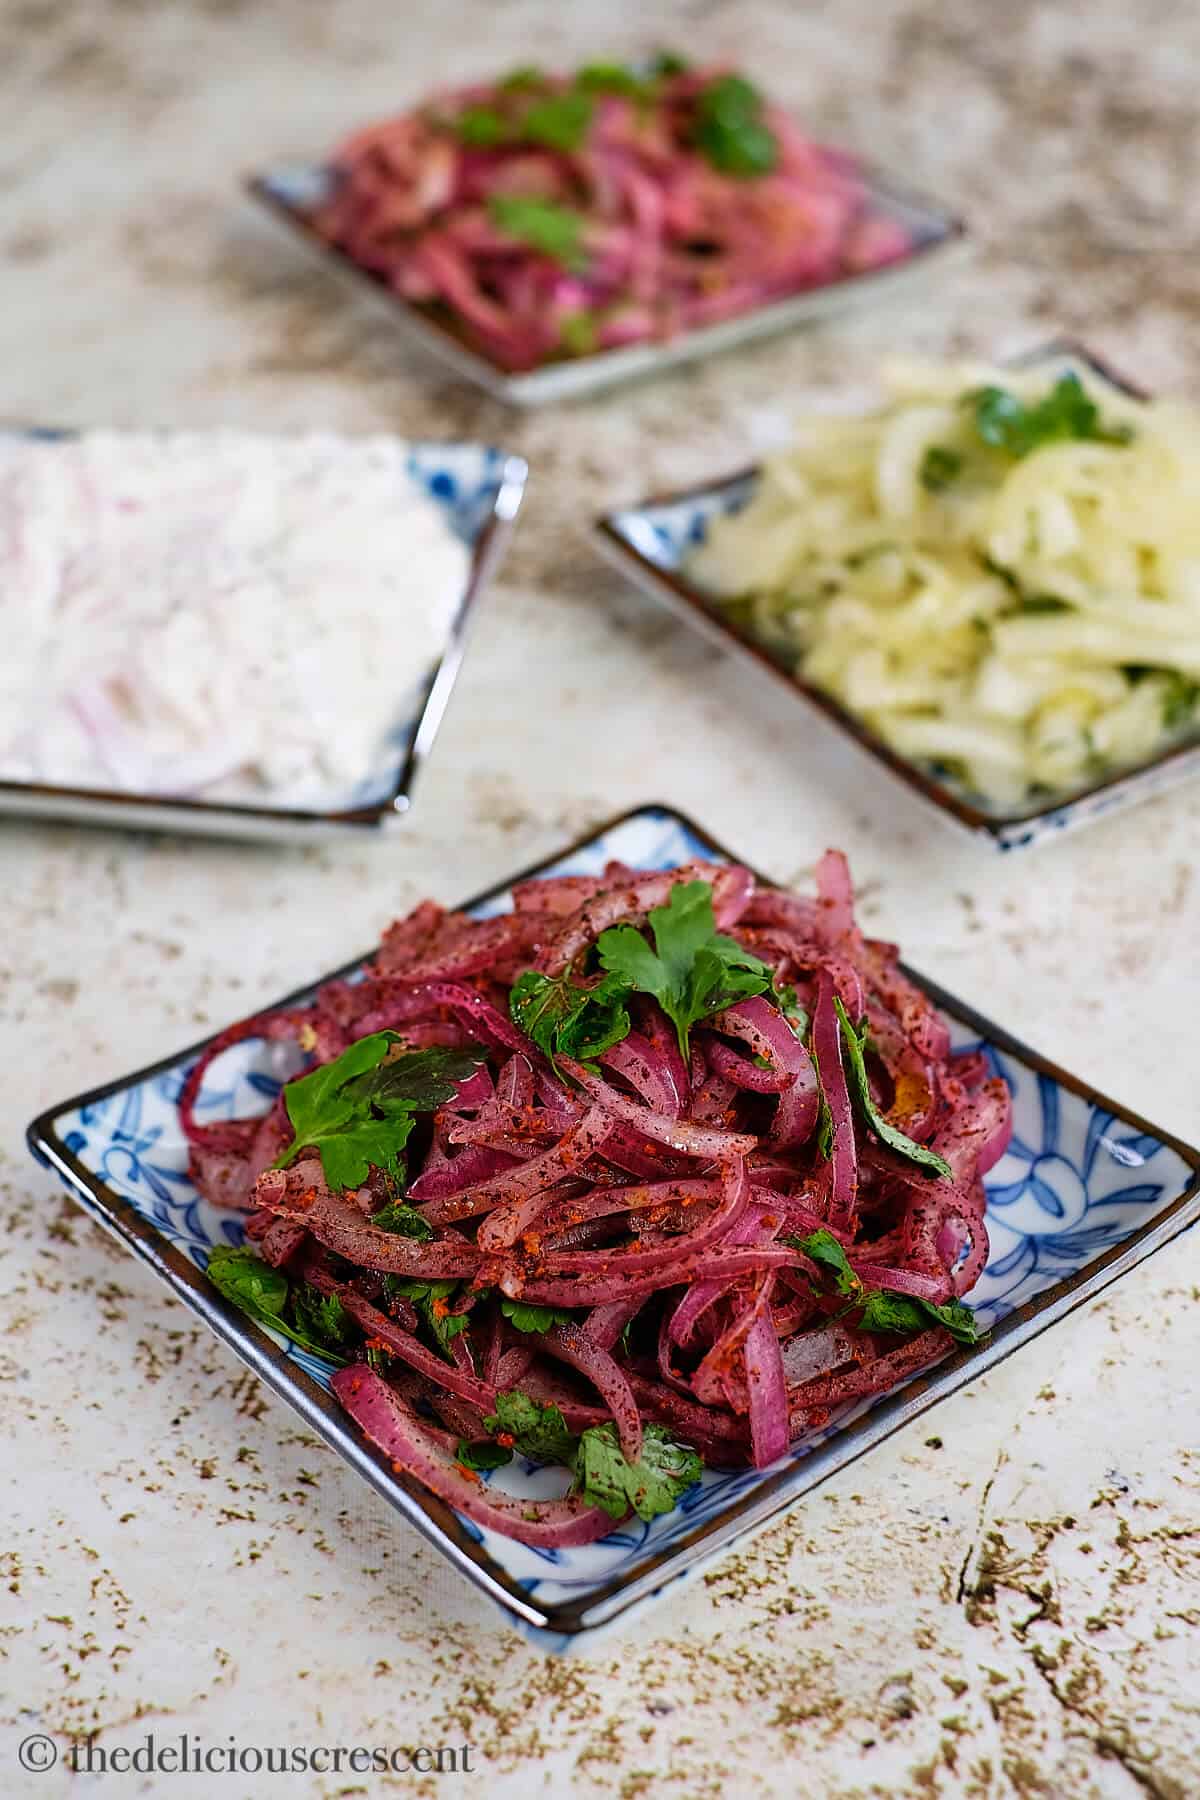 Four different types of onion salads served on a table.